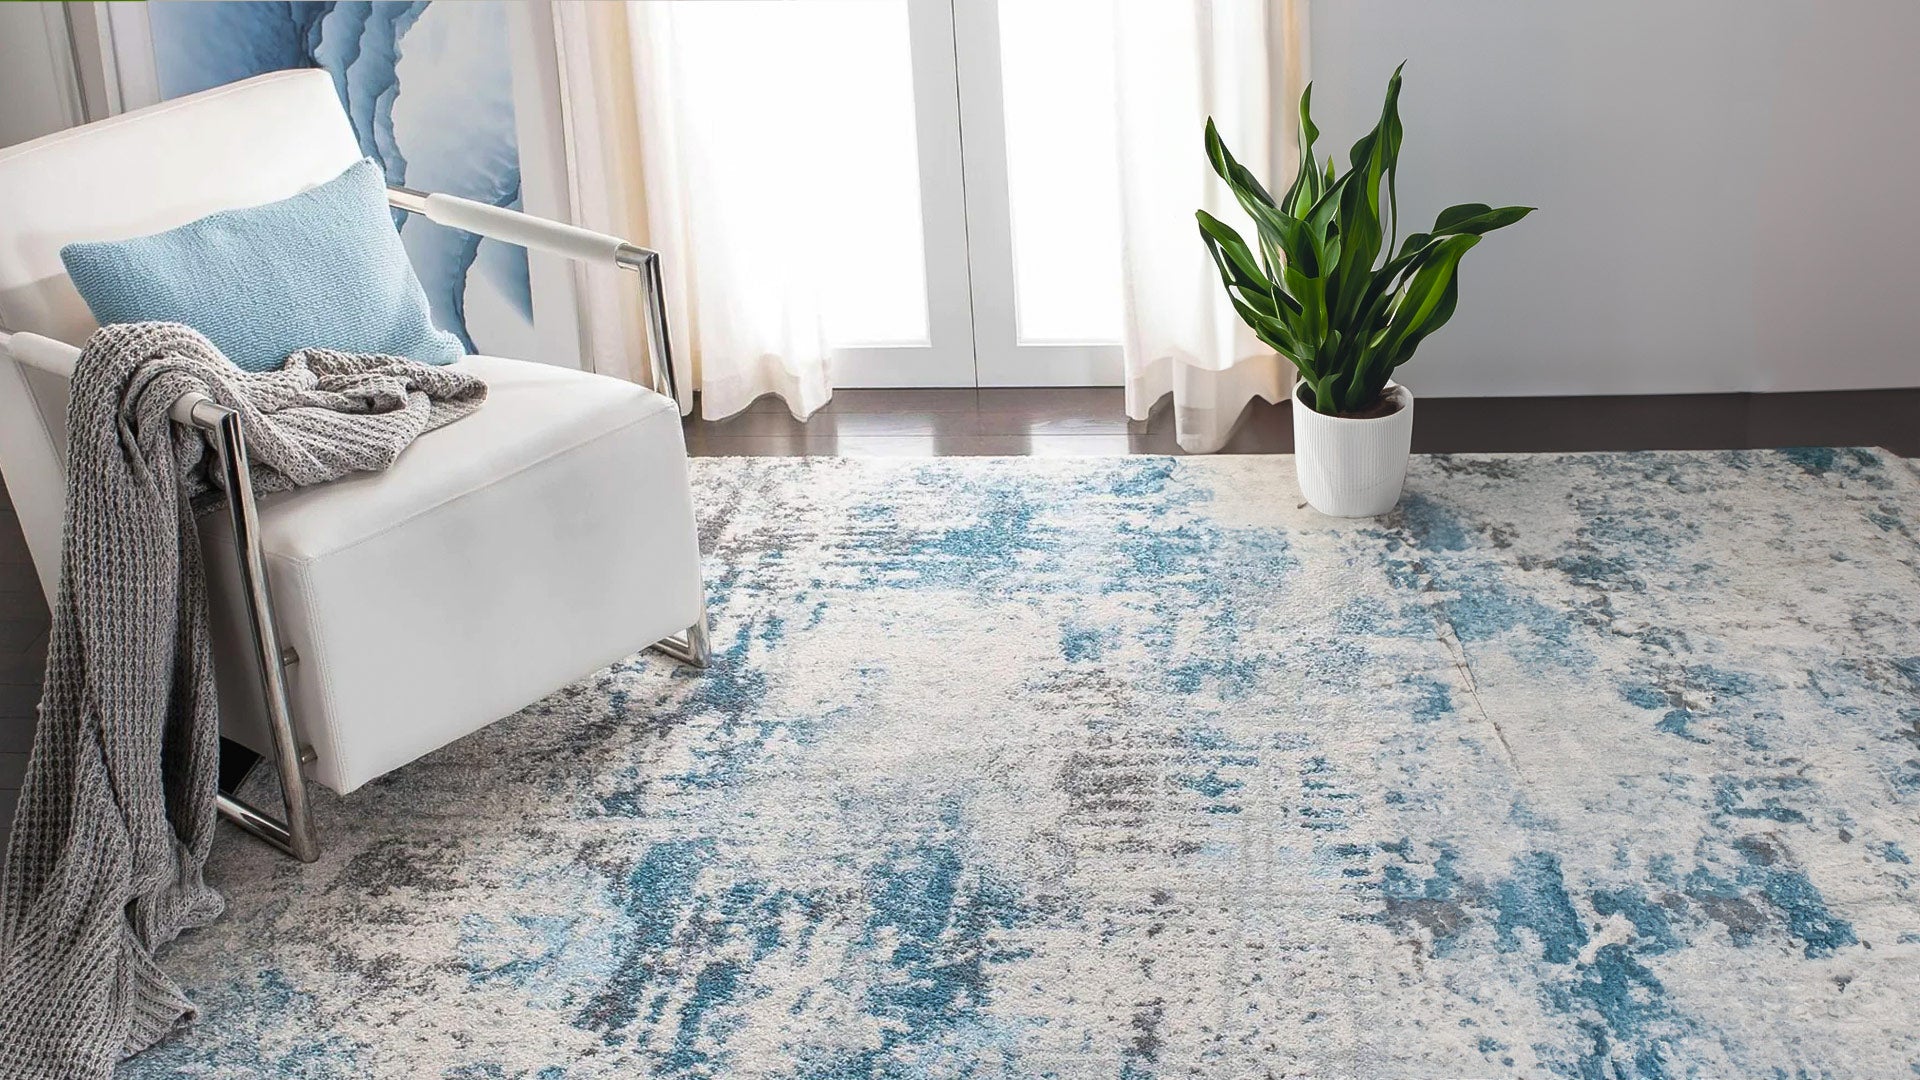 Adding Character and Comfort with Area Rugs